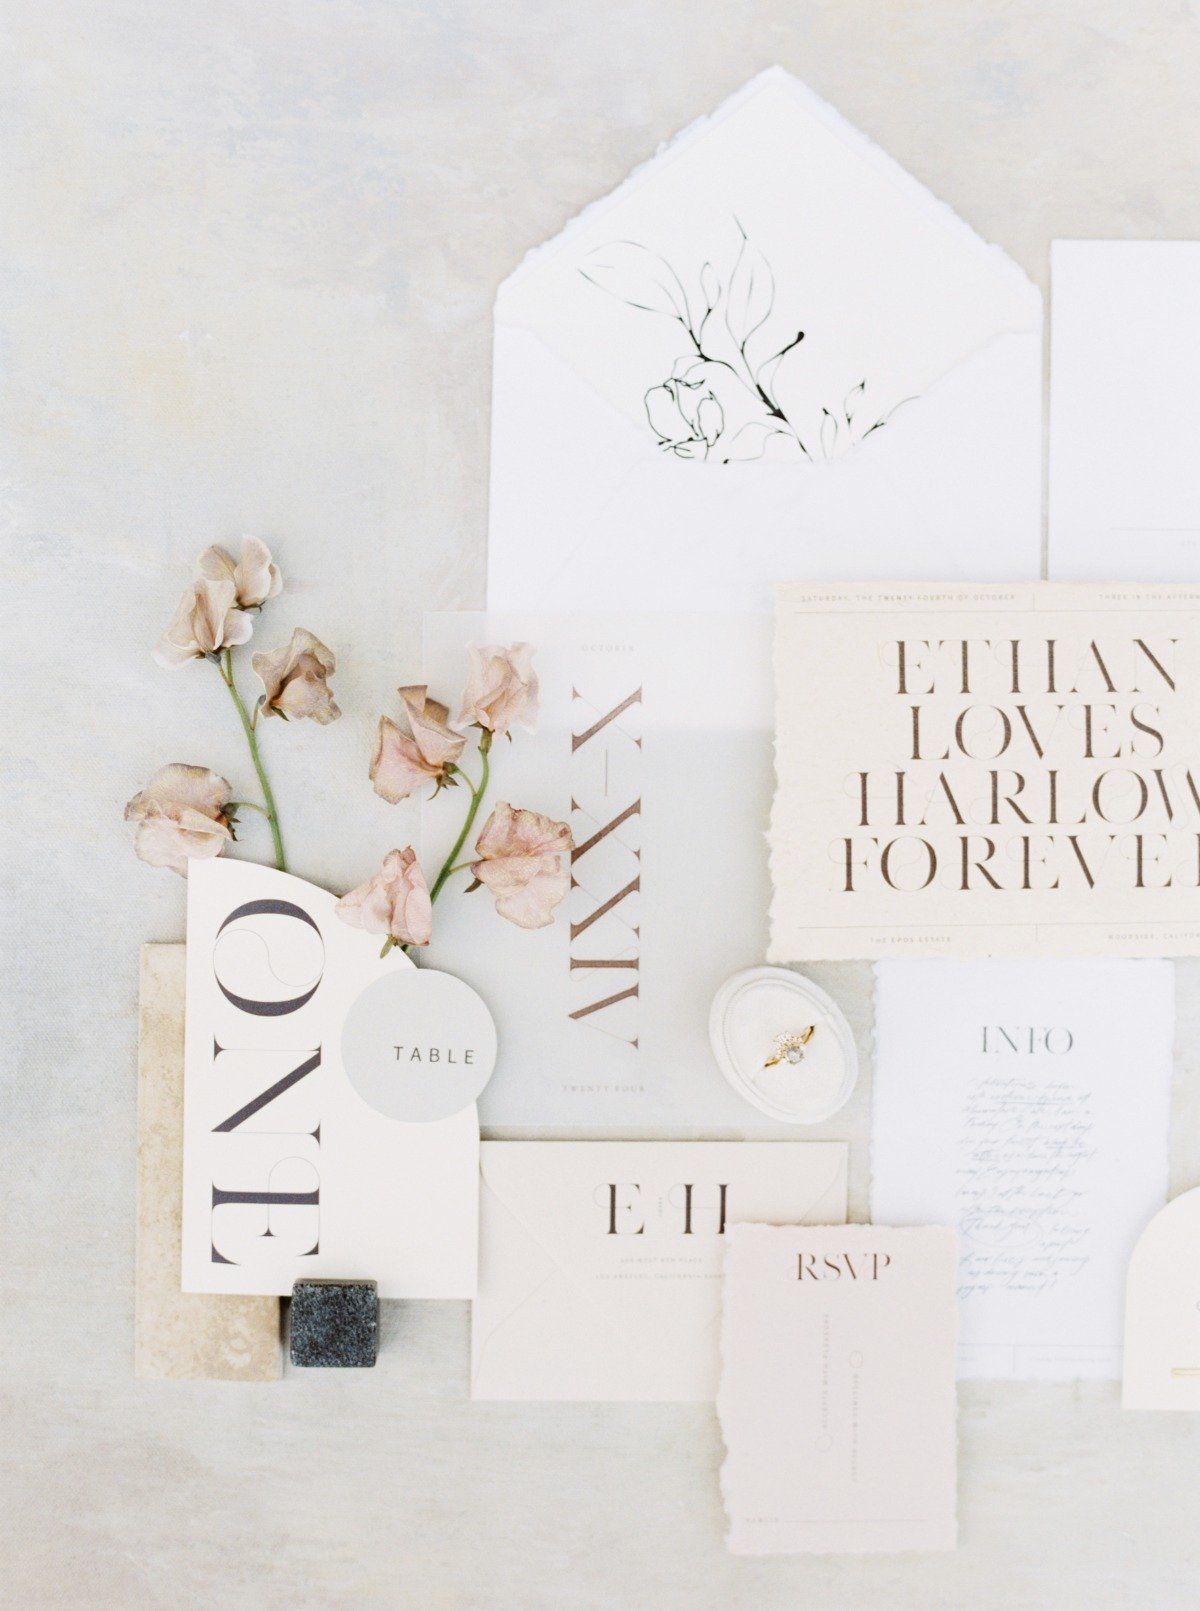 How To Have A Modern Romance Wedding in Black + Blush